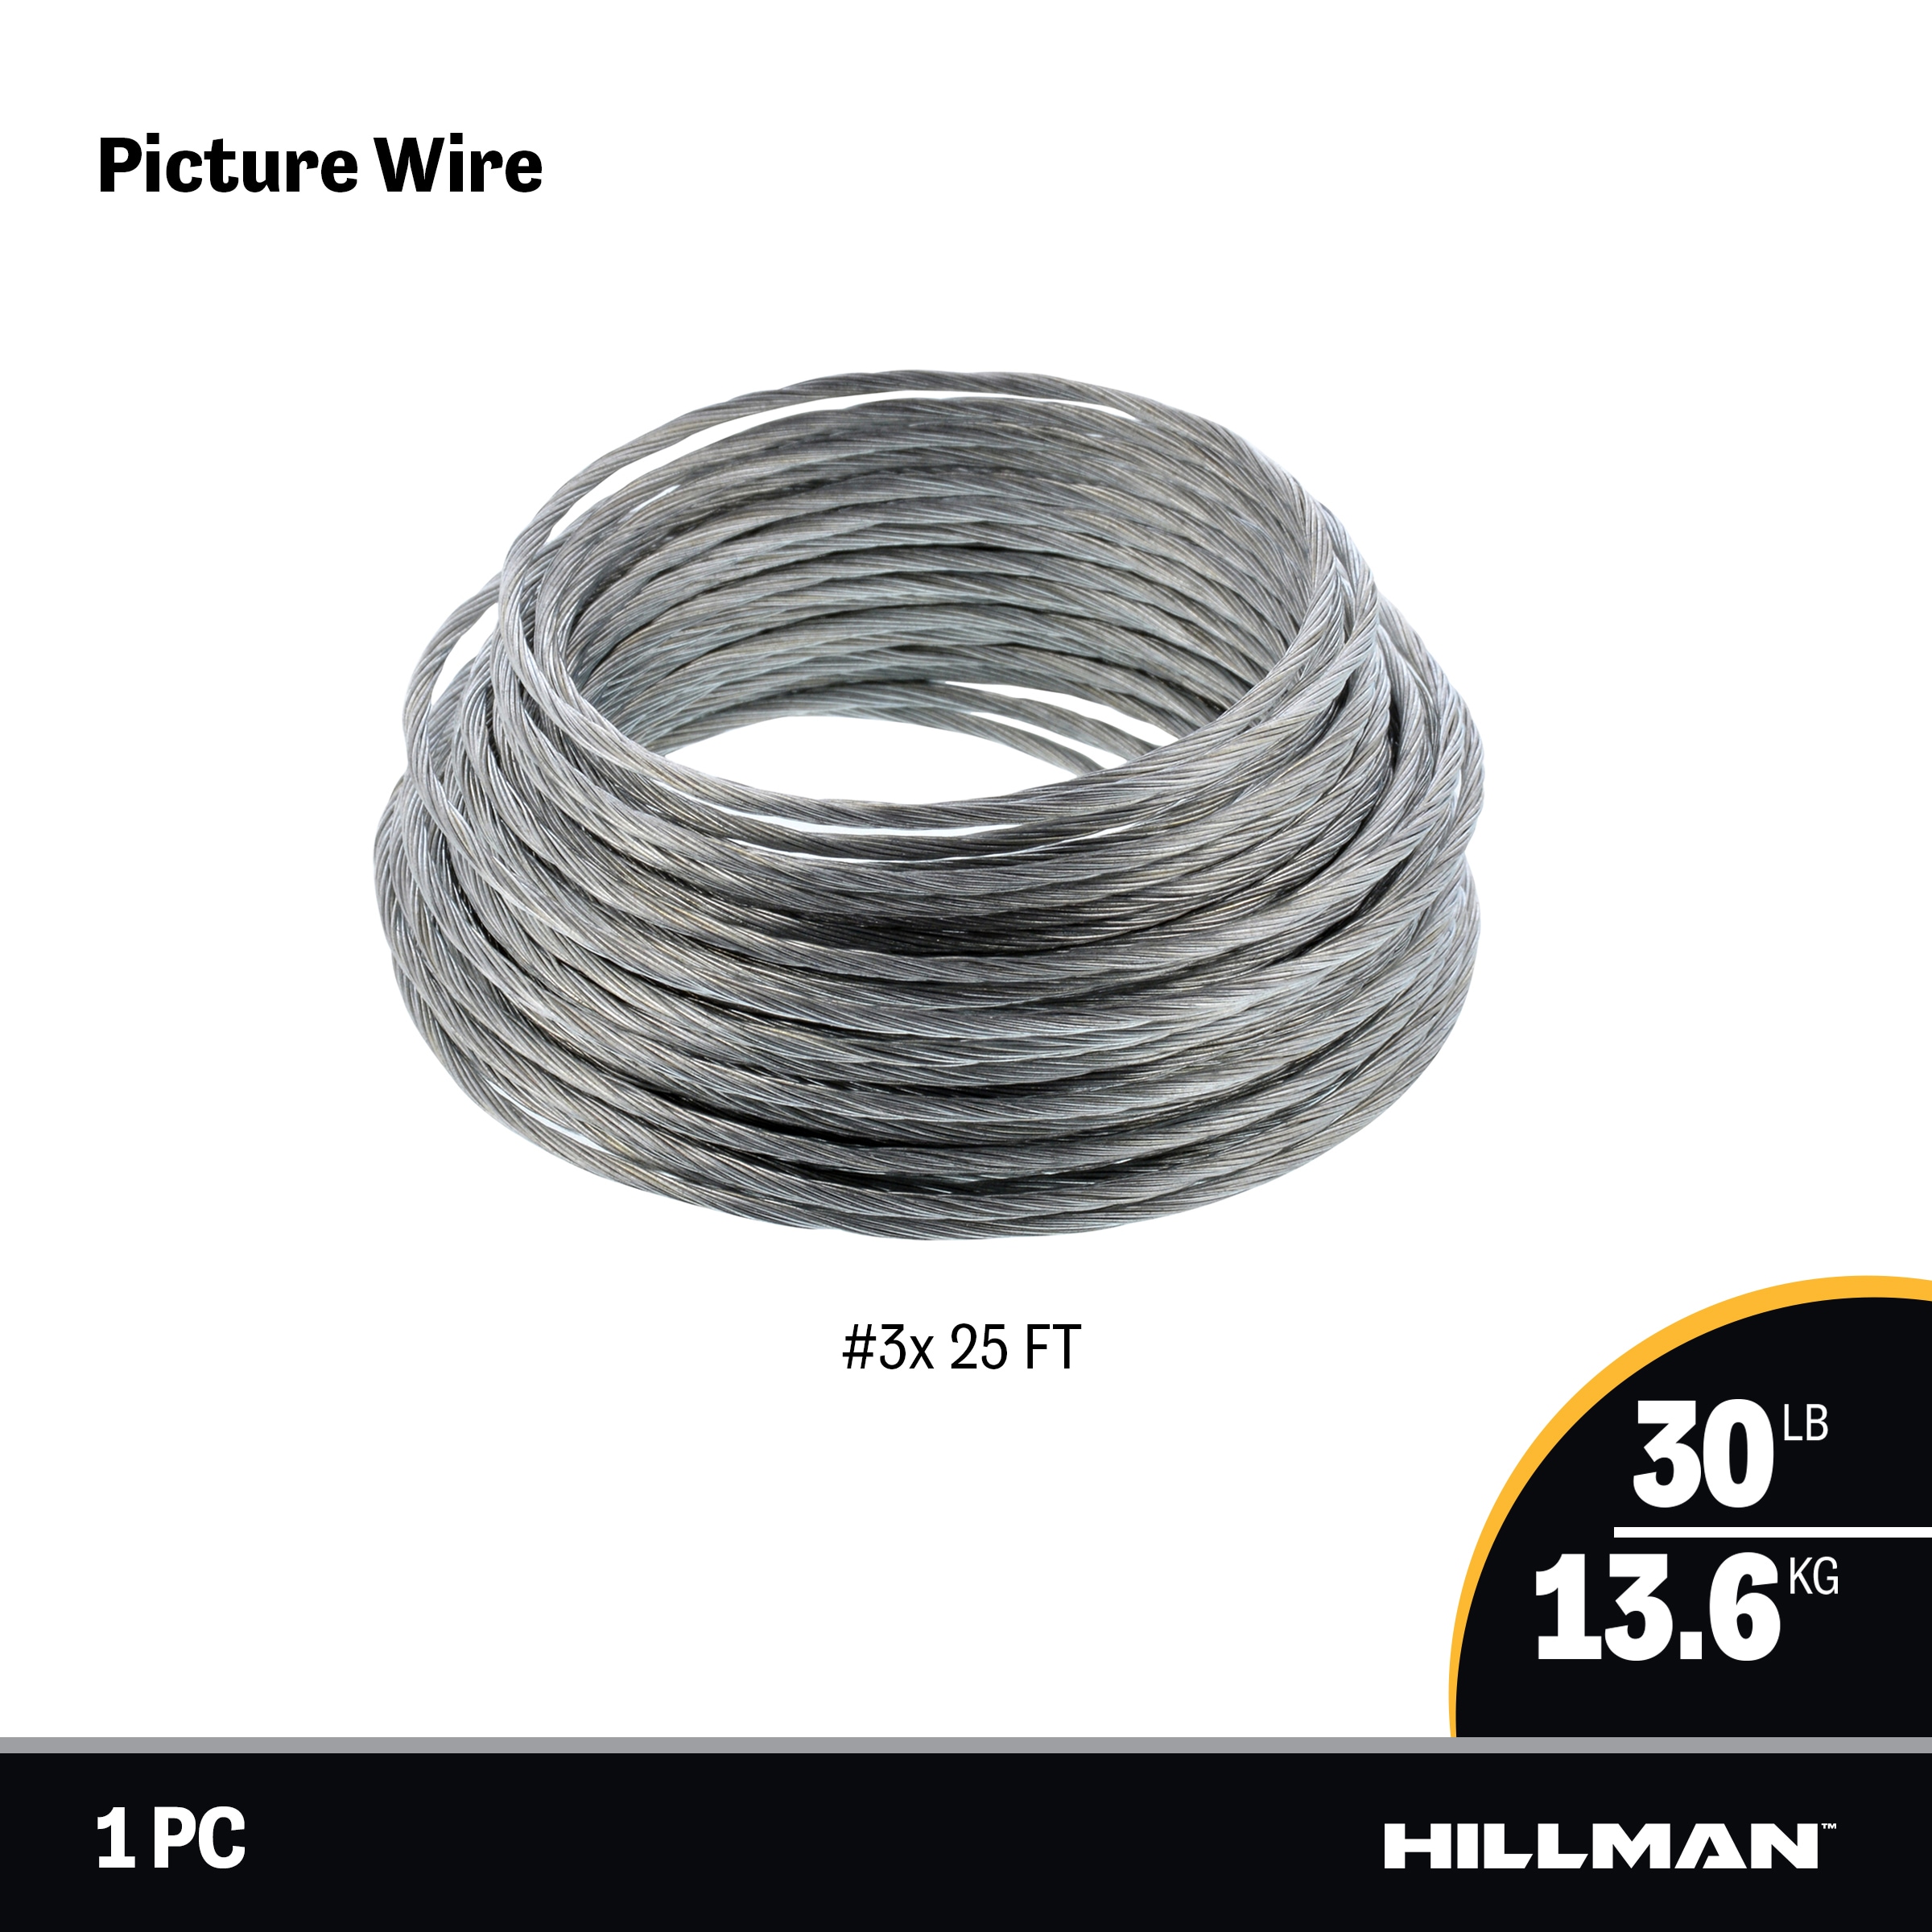 Hillman 50115 Stainless Steel Ook Picture Hanging Wire 9 ft. 